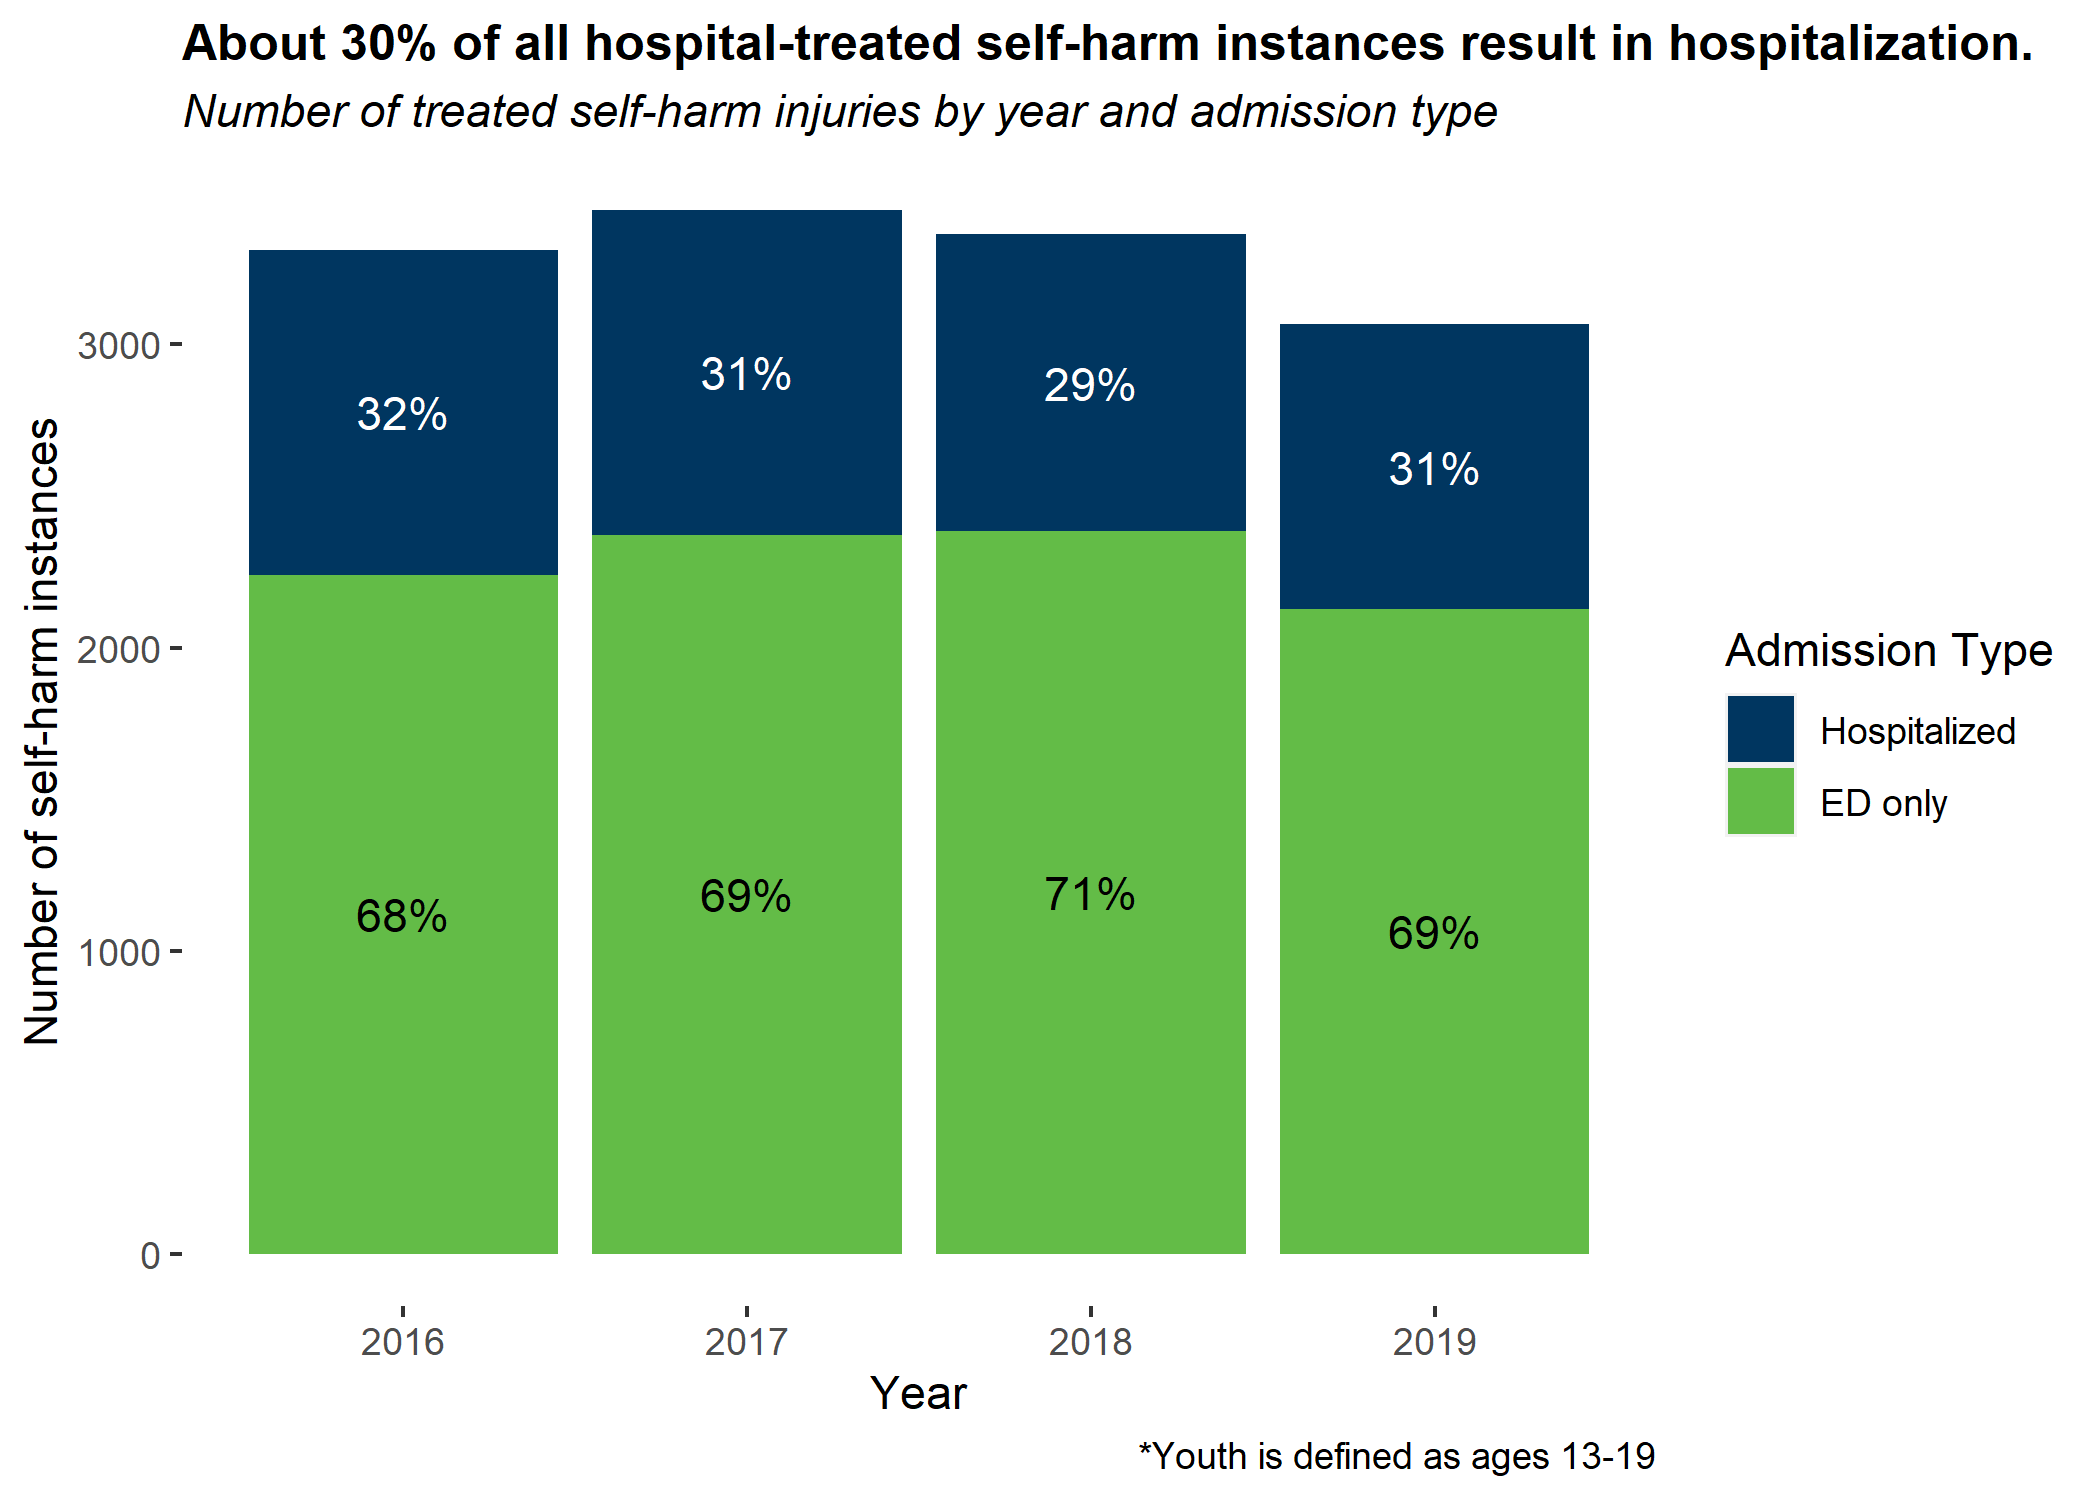 Number of treated self-harm injuries by year and admission type. About 30% of hospital-treated self-harm instances result in hospitalization. 